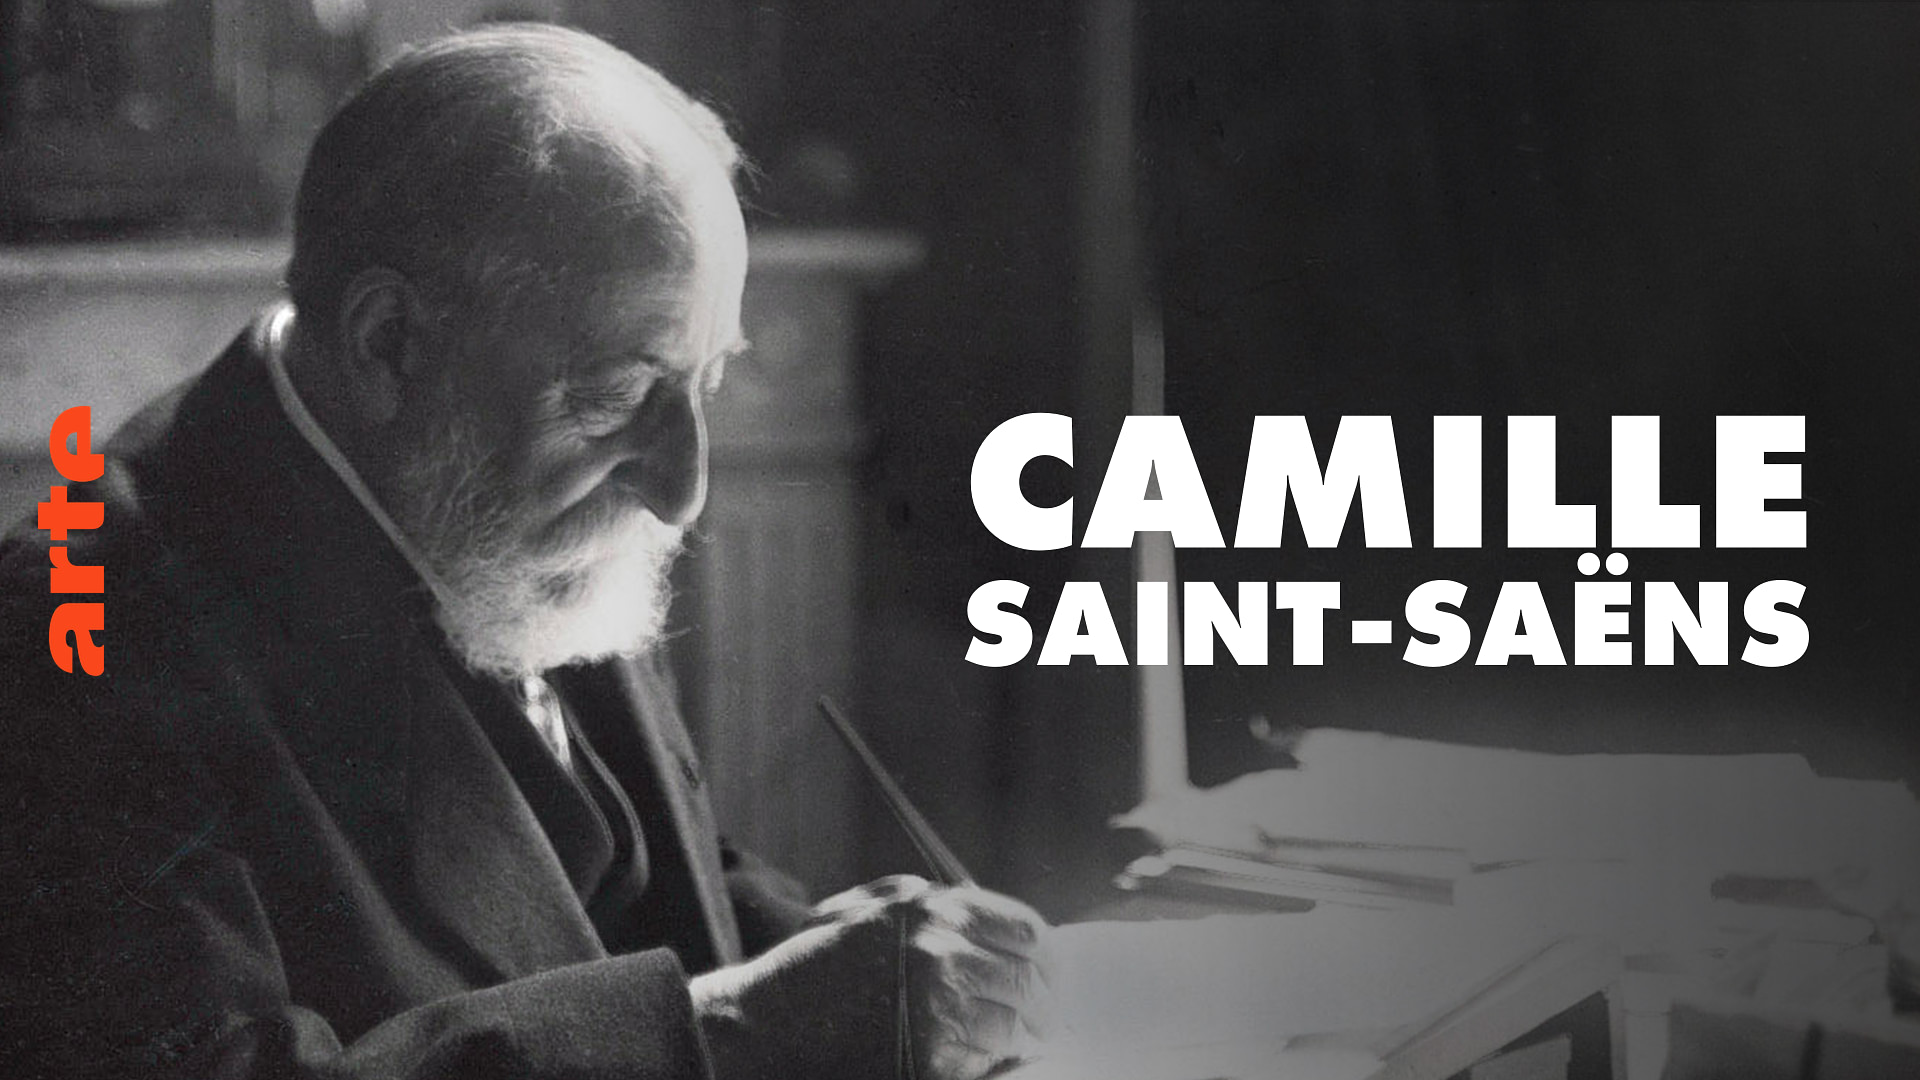 Saint-Saëns: Pioneer and paradox, rethinking the composer a